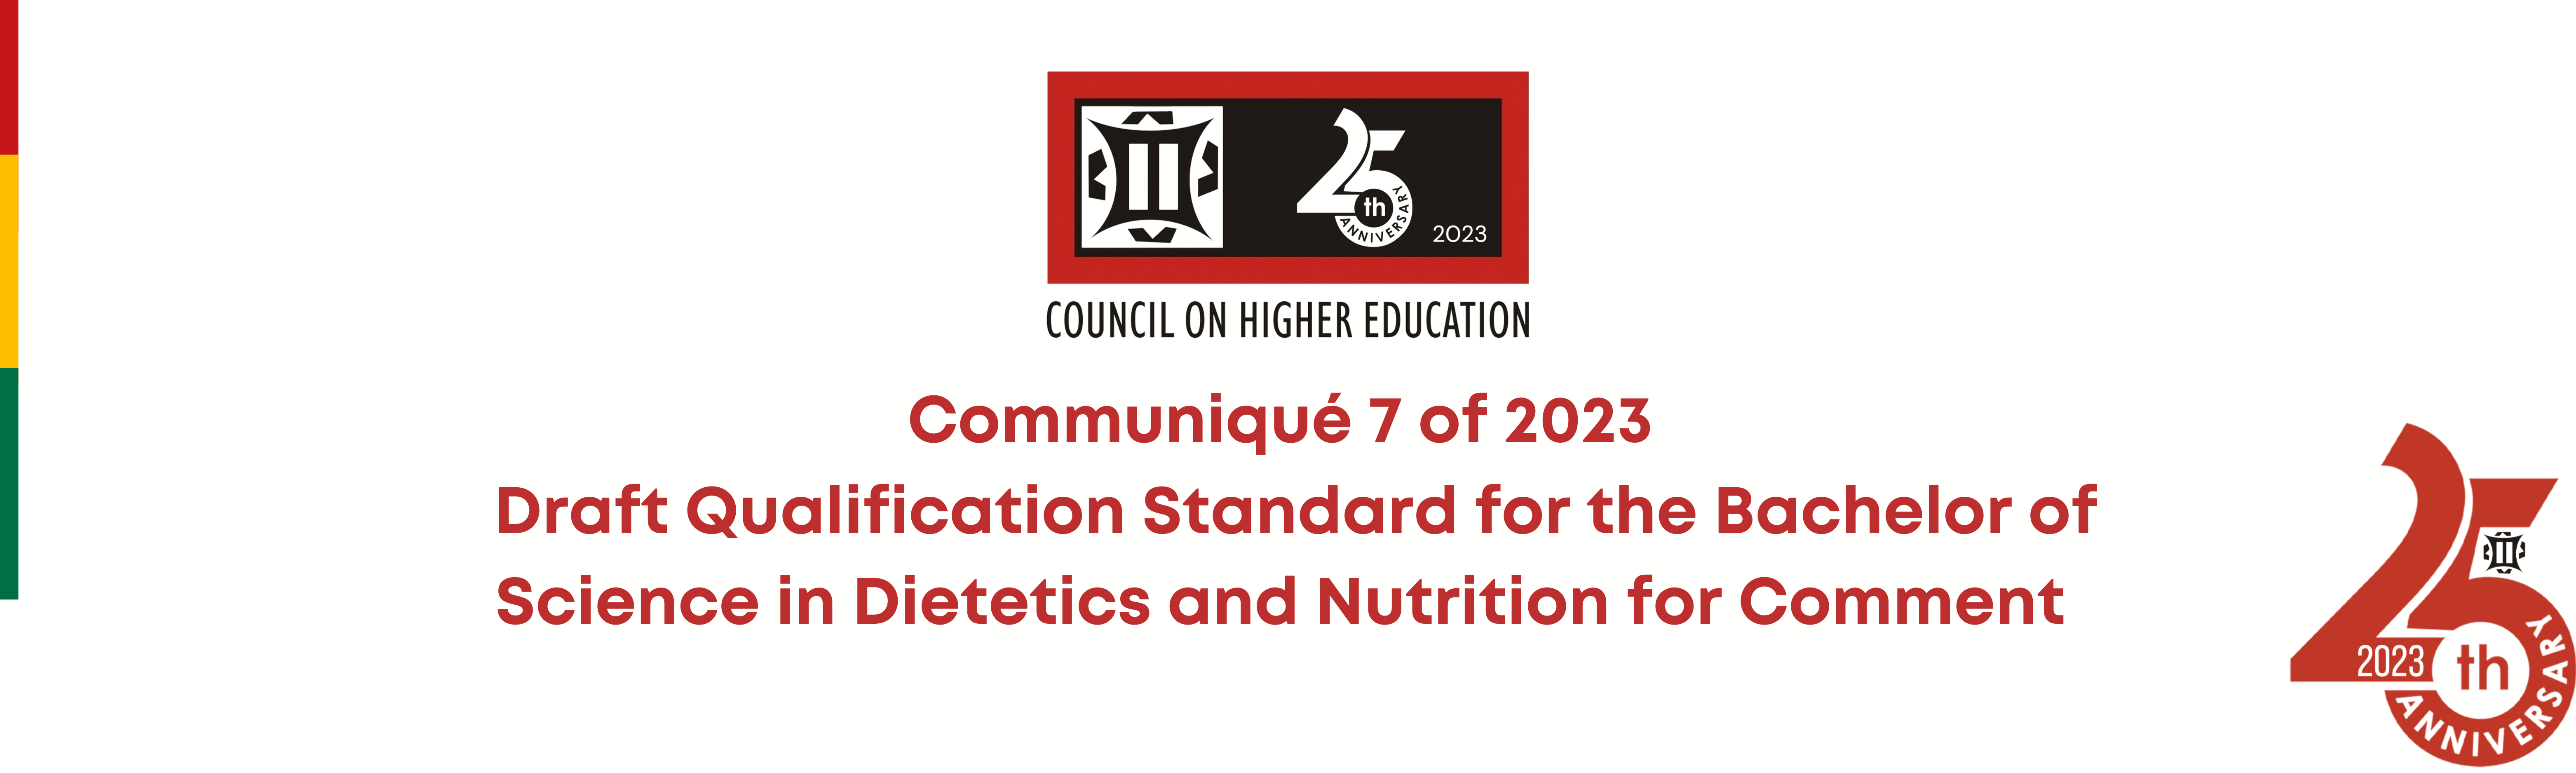 Communiqué 7 of 2023 REQUEST TO COMMENT ON DRAFT QUALIFICATION STANDARD FOR BACHELOR OF SCIENCE IN DIETETICS AND NUTRITION